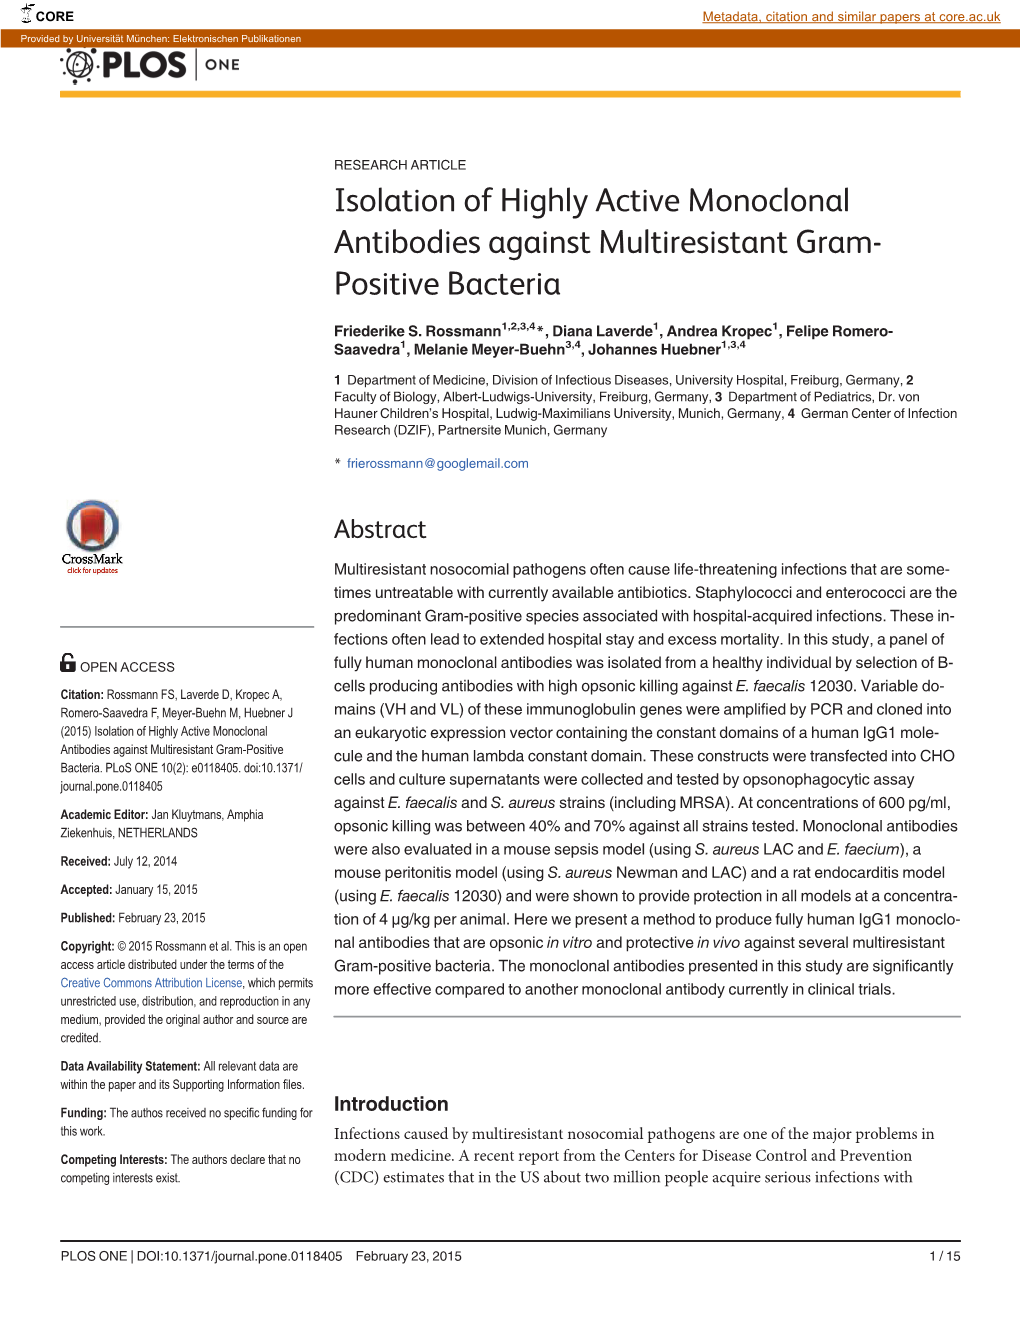 Isolation of Highly Active Monoclonal Antibodies Against Multiresistant Gram- Positive Bacteria